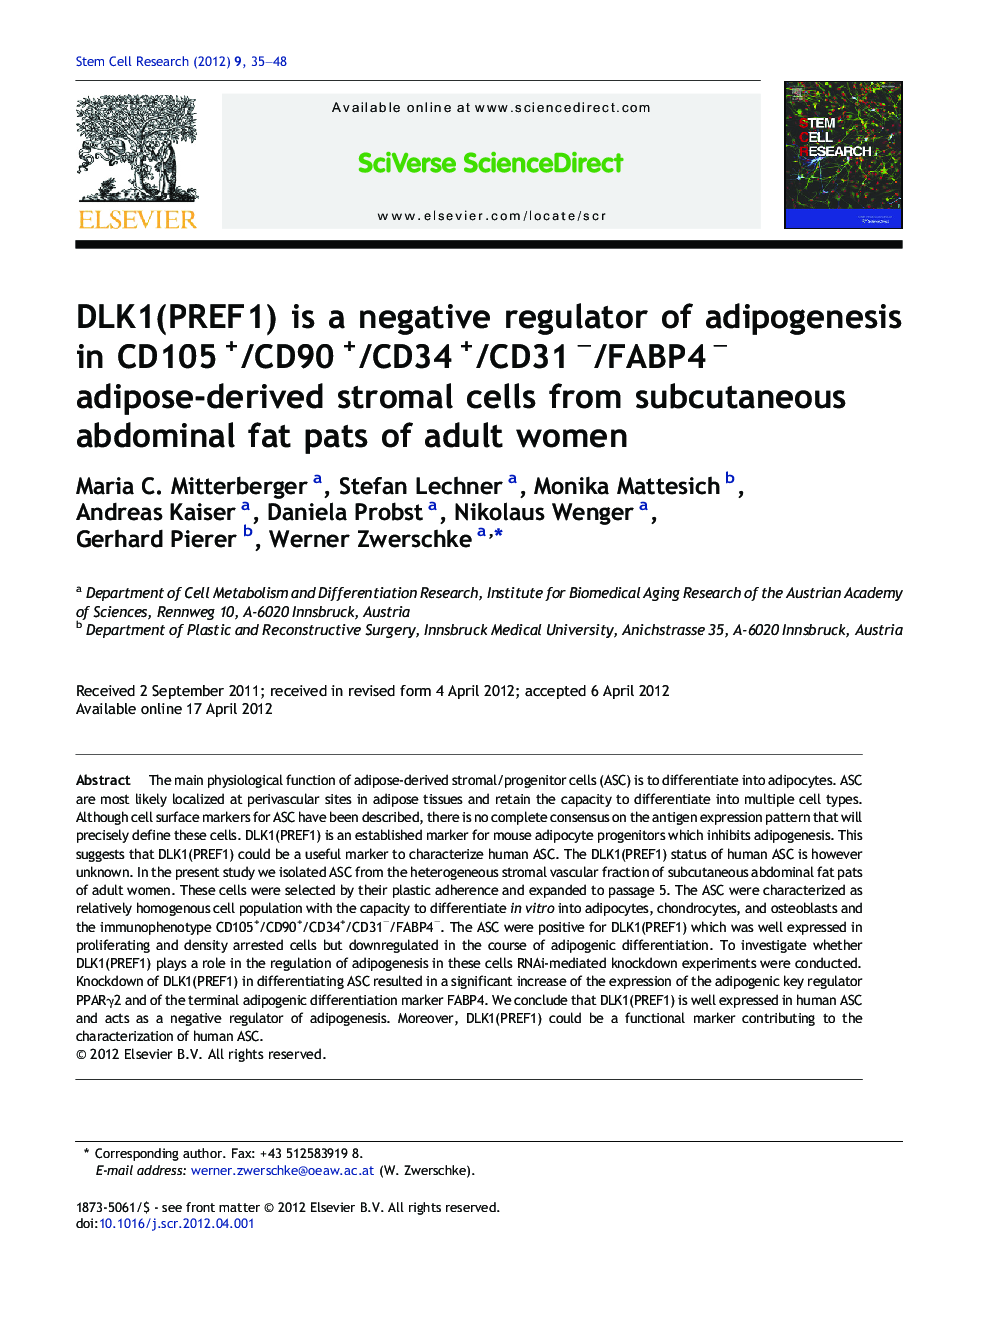 DLK1(PREF1) is a negative regulator of adipogenesis in CD105+/CD90+/CD34+/CD31−/FABP4− adipose-derived stromal cells from subcutaneous abdominal fat pats of adult women